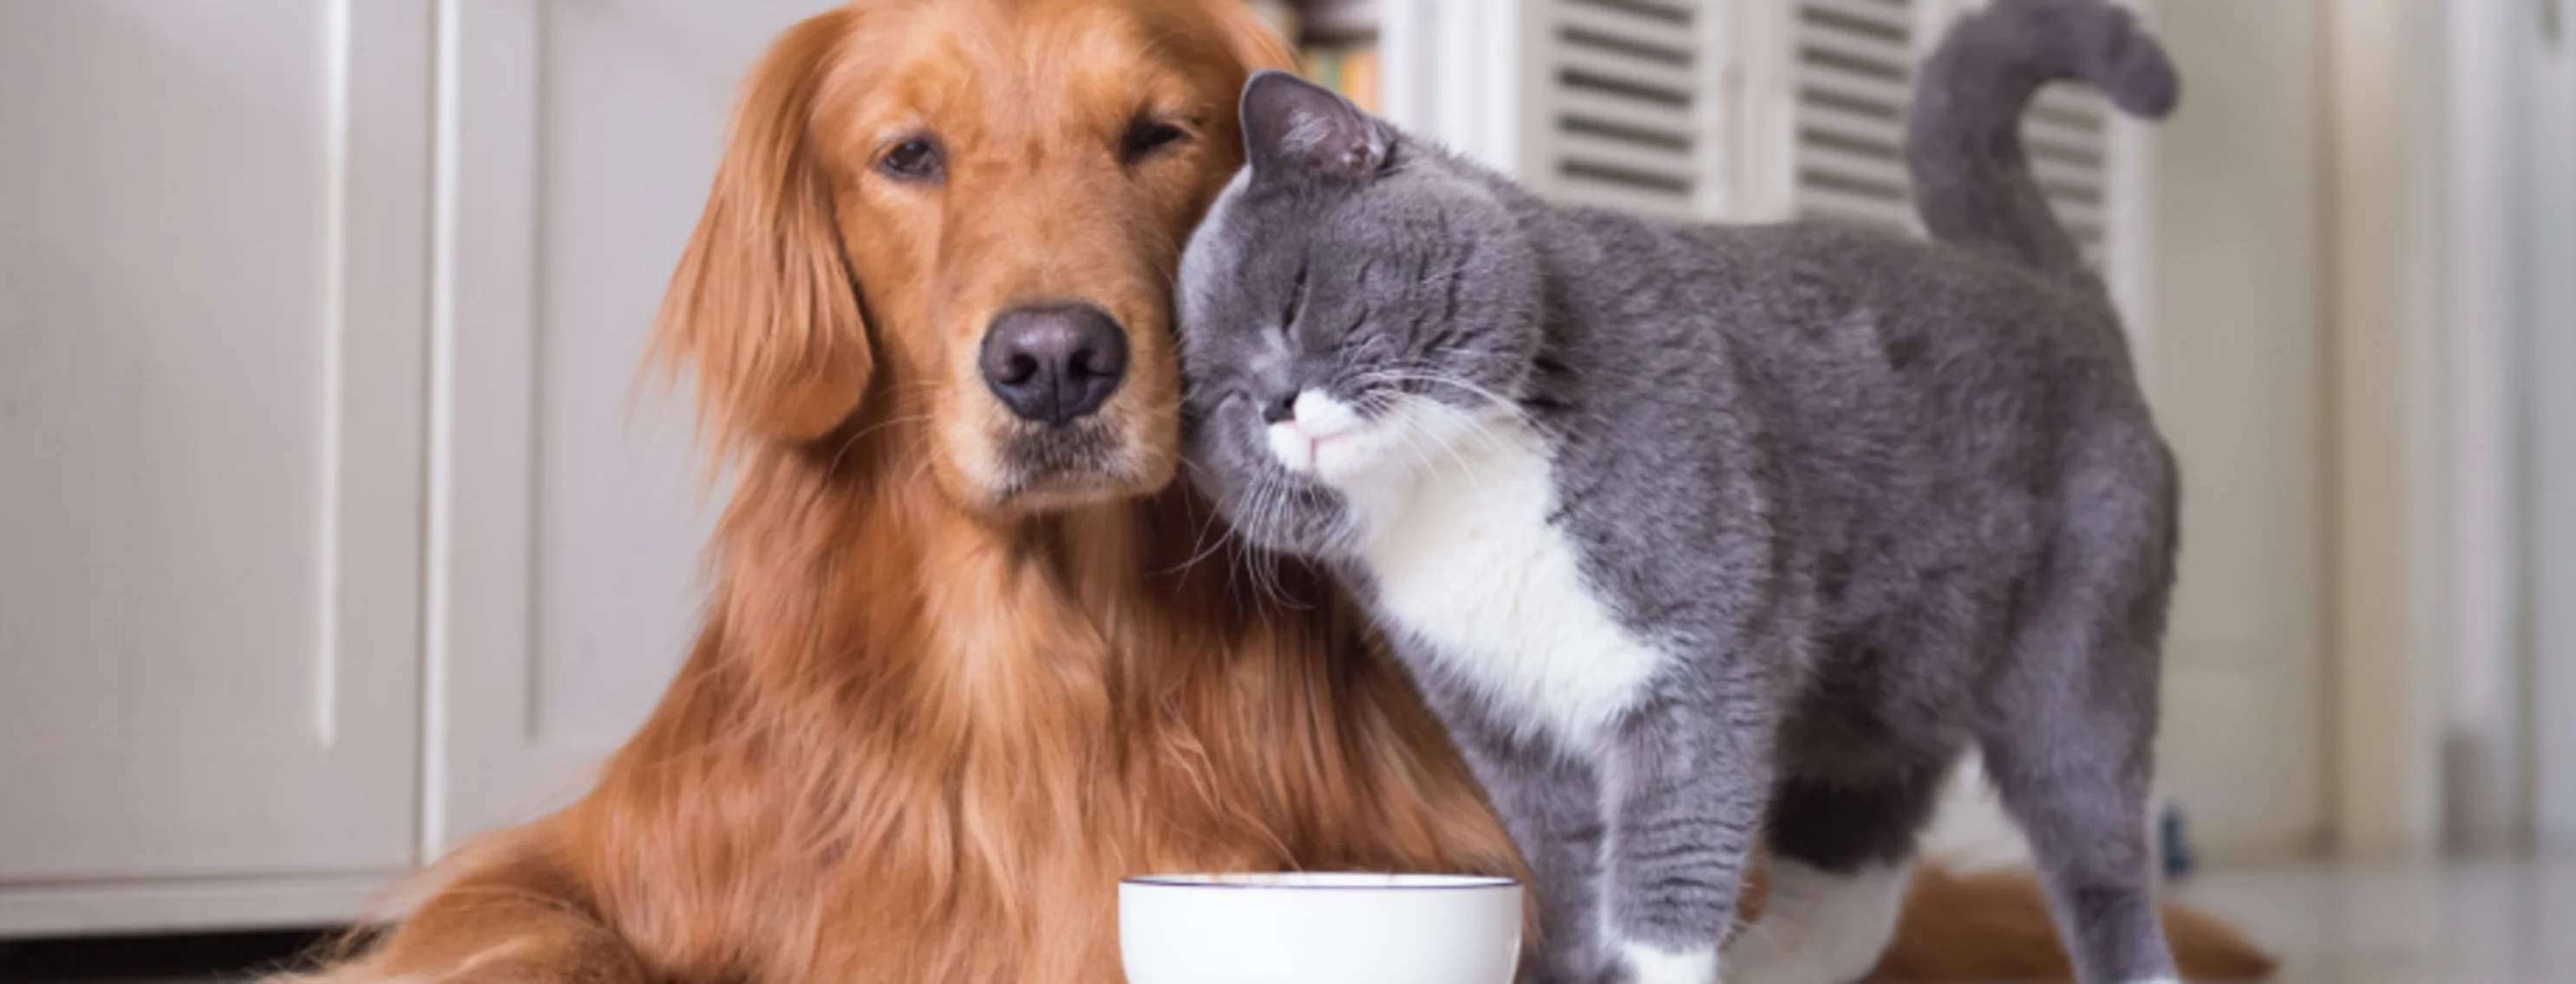 A Gray Cat Leaning Against a Brown Dog next to a Food Bowl